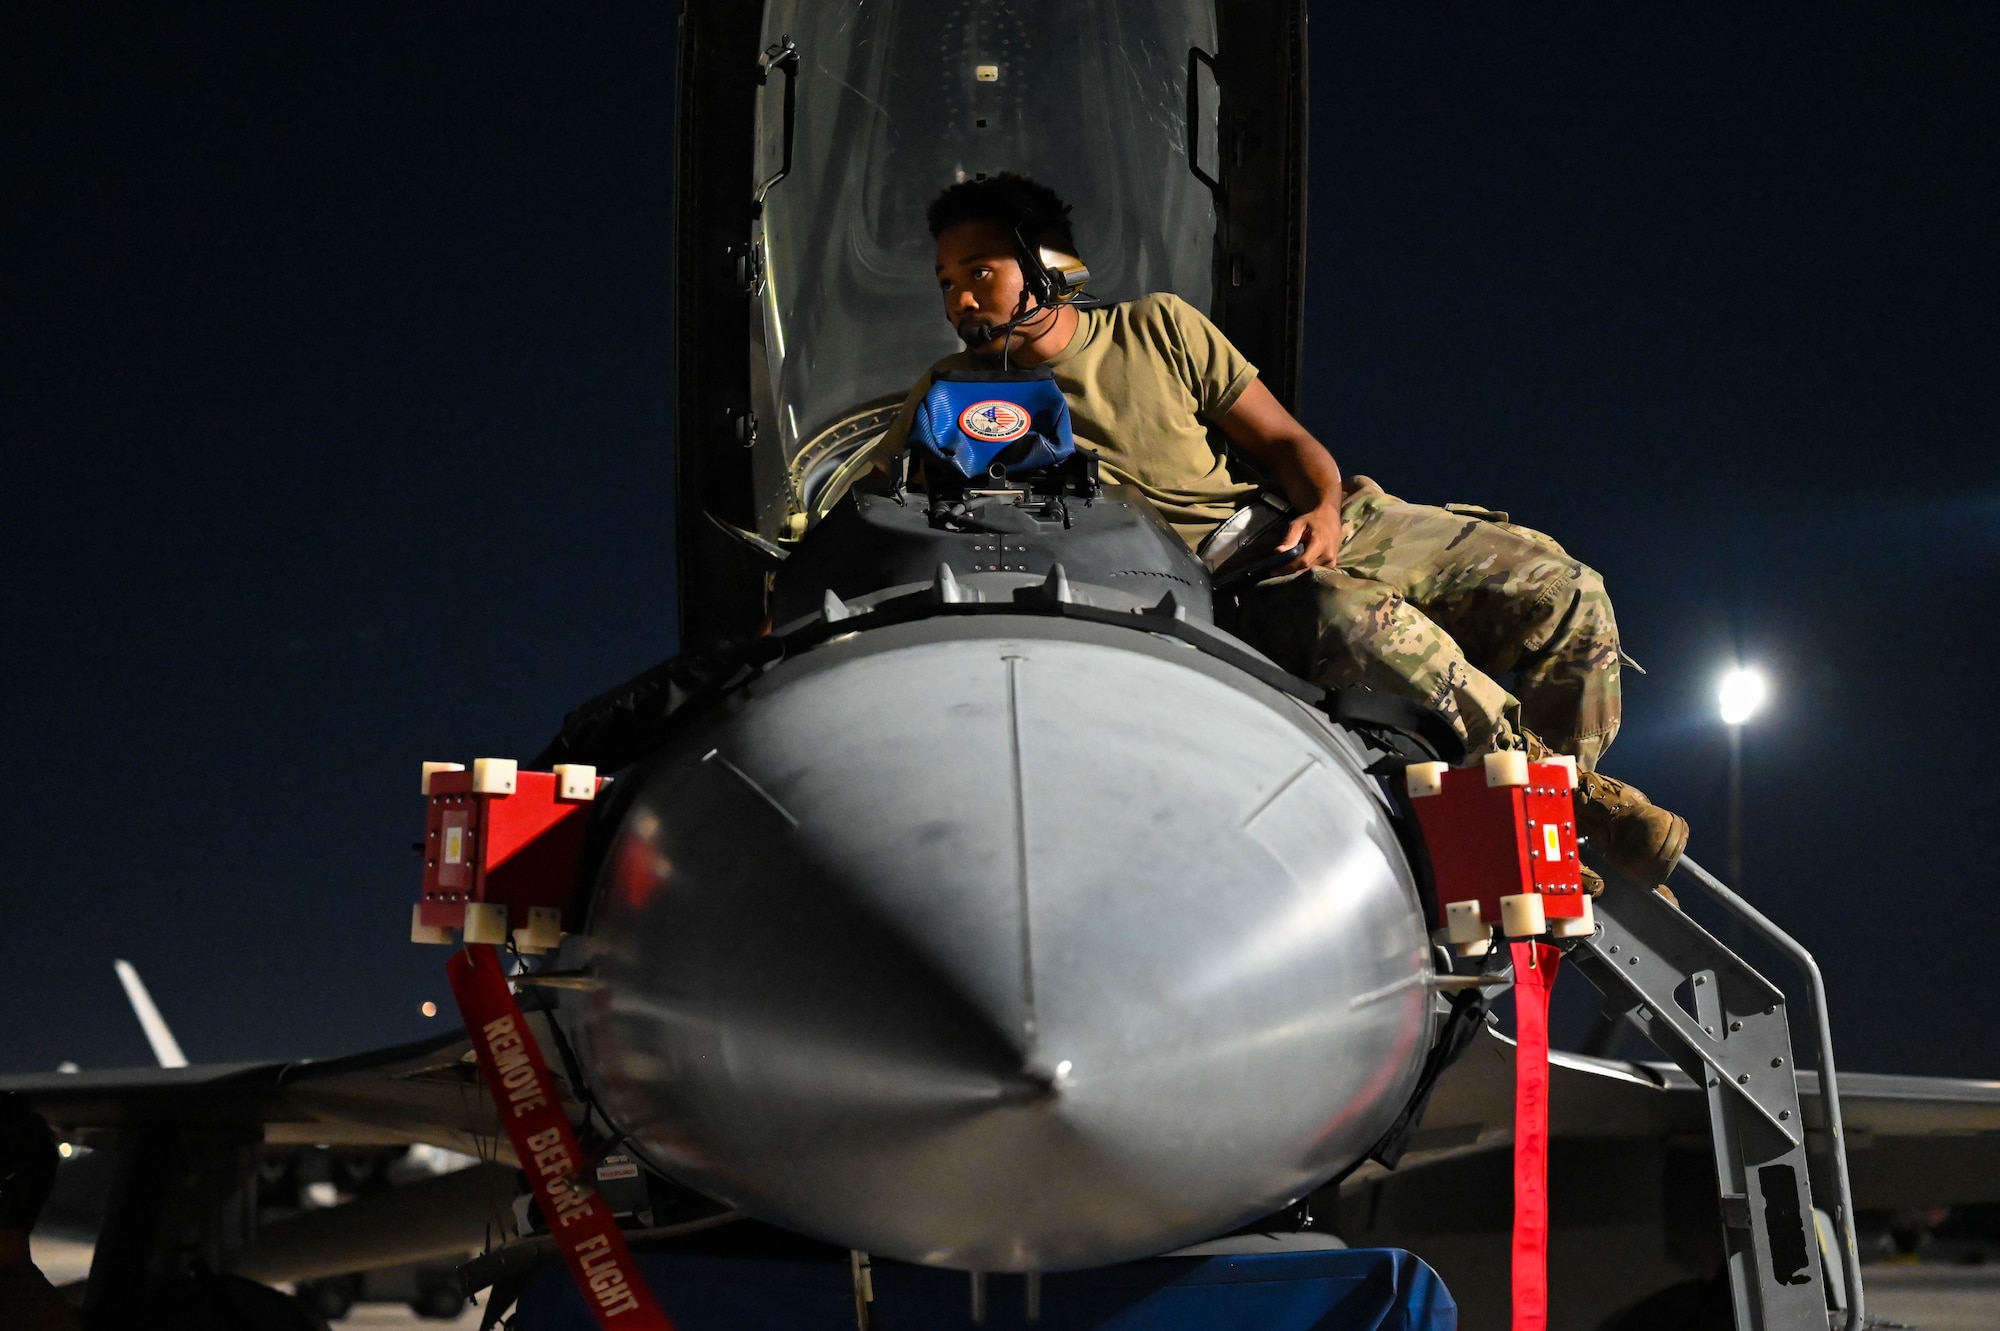 An avionics Airman evaluates the interior of the cockpit of an F-16 Fighting Falcon at Nellis Air Force Base, Nev., July 13, 2023. Effective electronic warfare systems on aircraft are essential for mission success for the warfighters. (U.S. Air Force photo by Capt. Benjamin Aronson)